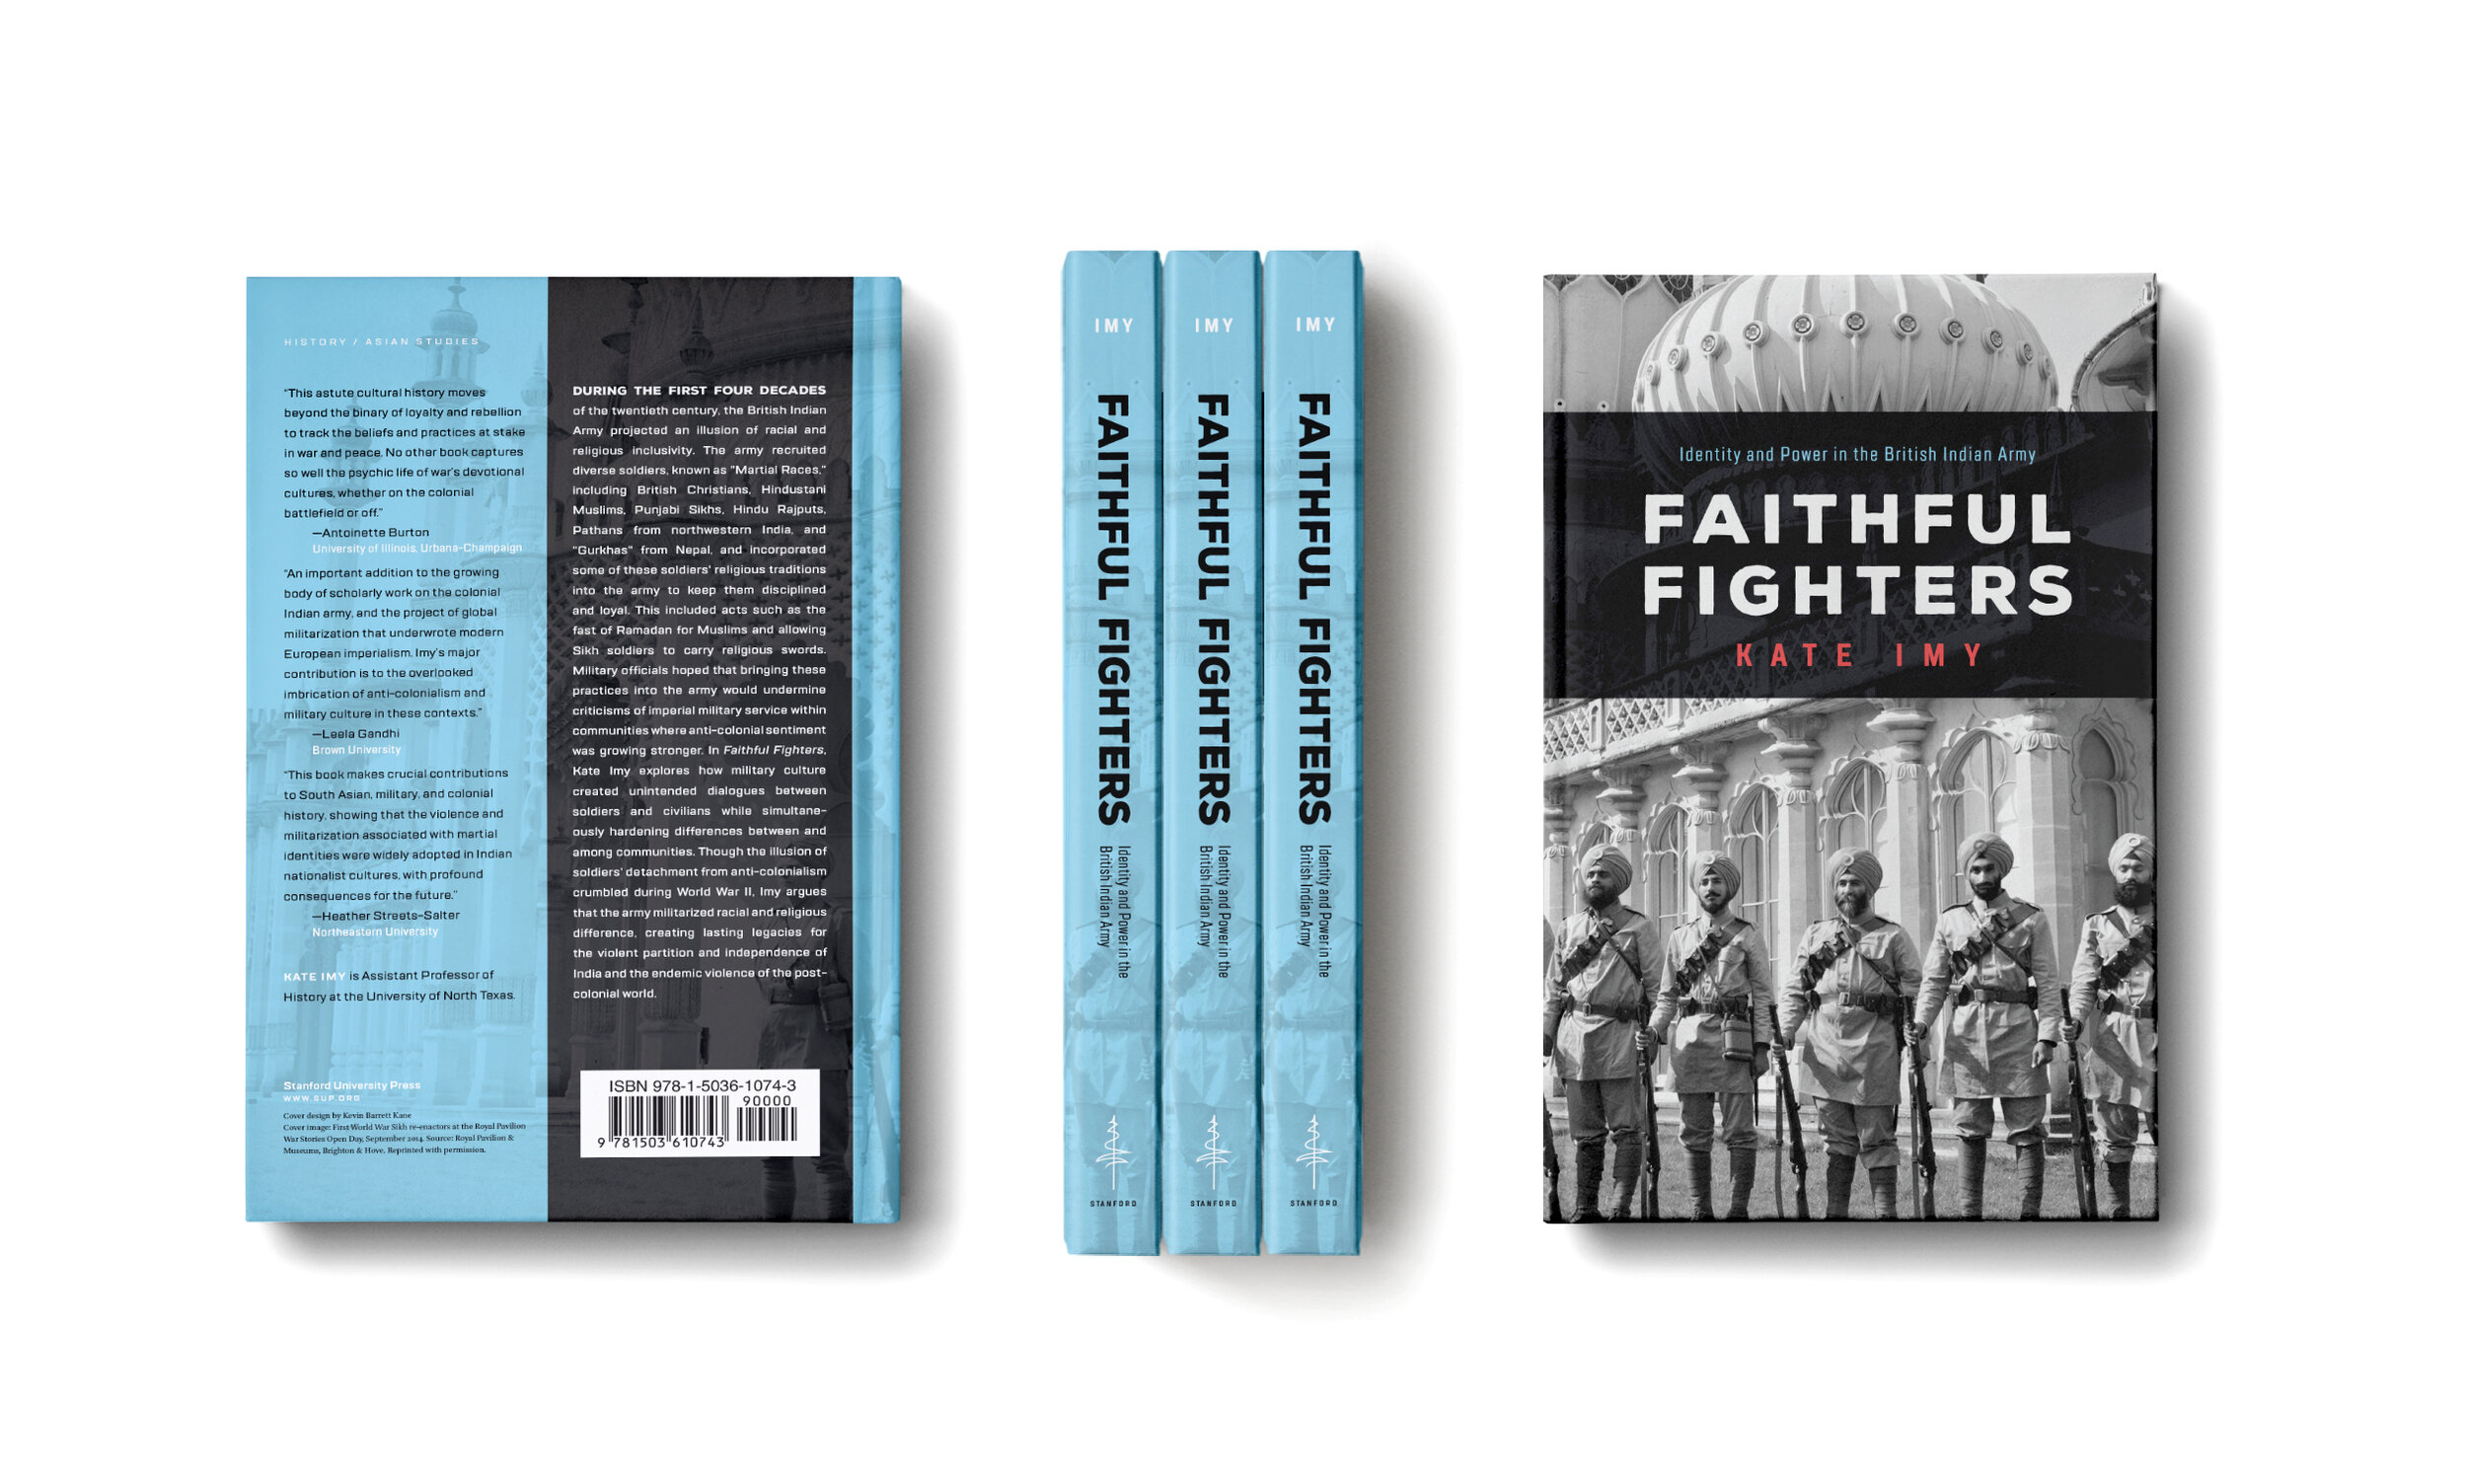 Faithful Fighters, by Kate Imy (Stanford, 2019), 2020 Stansky Book Prize